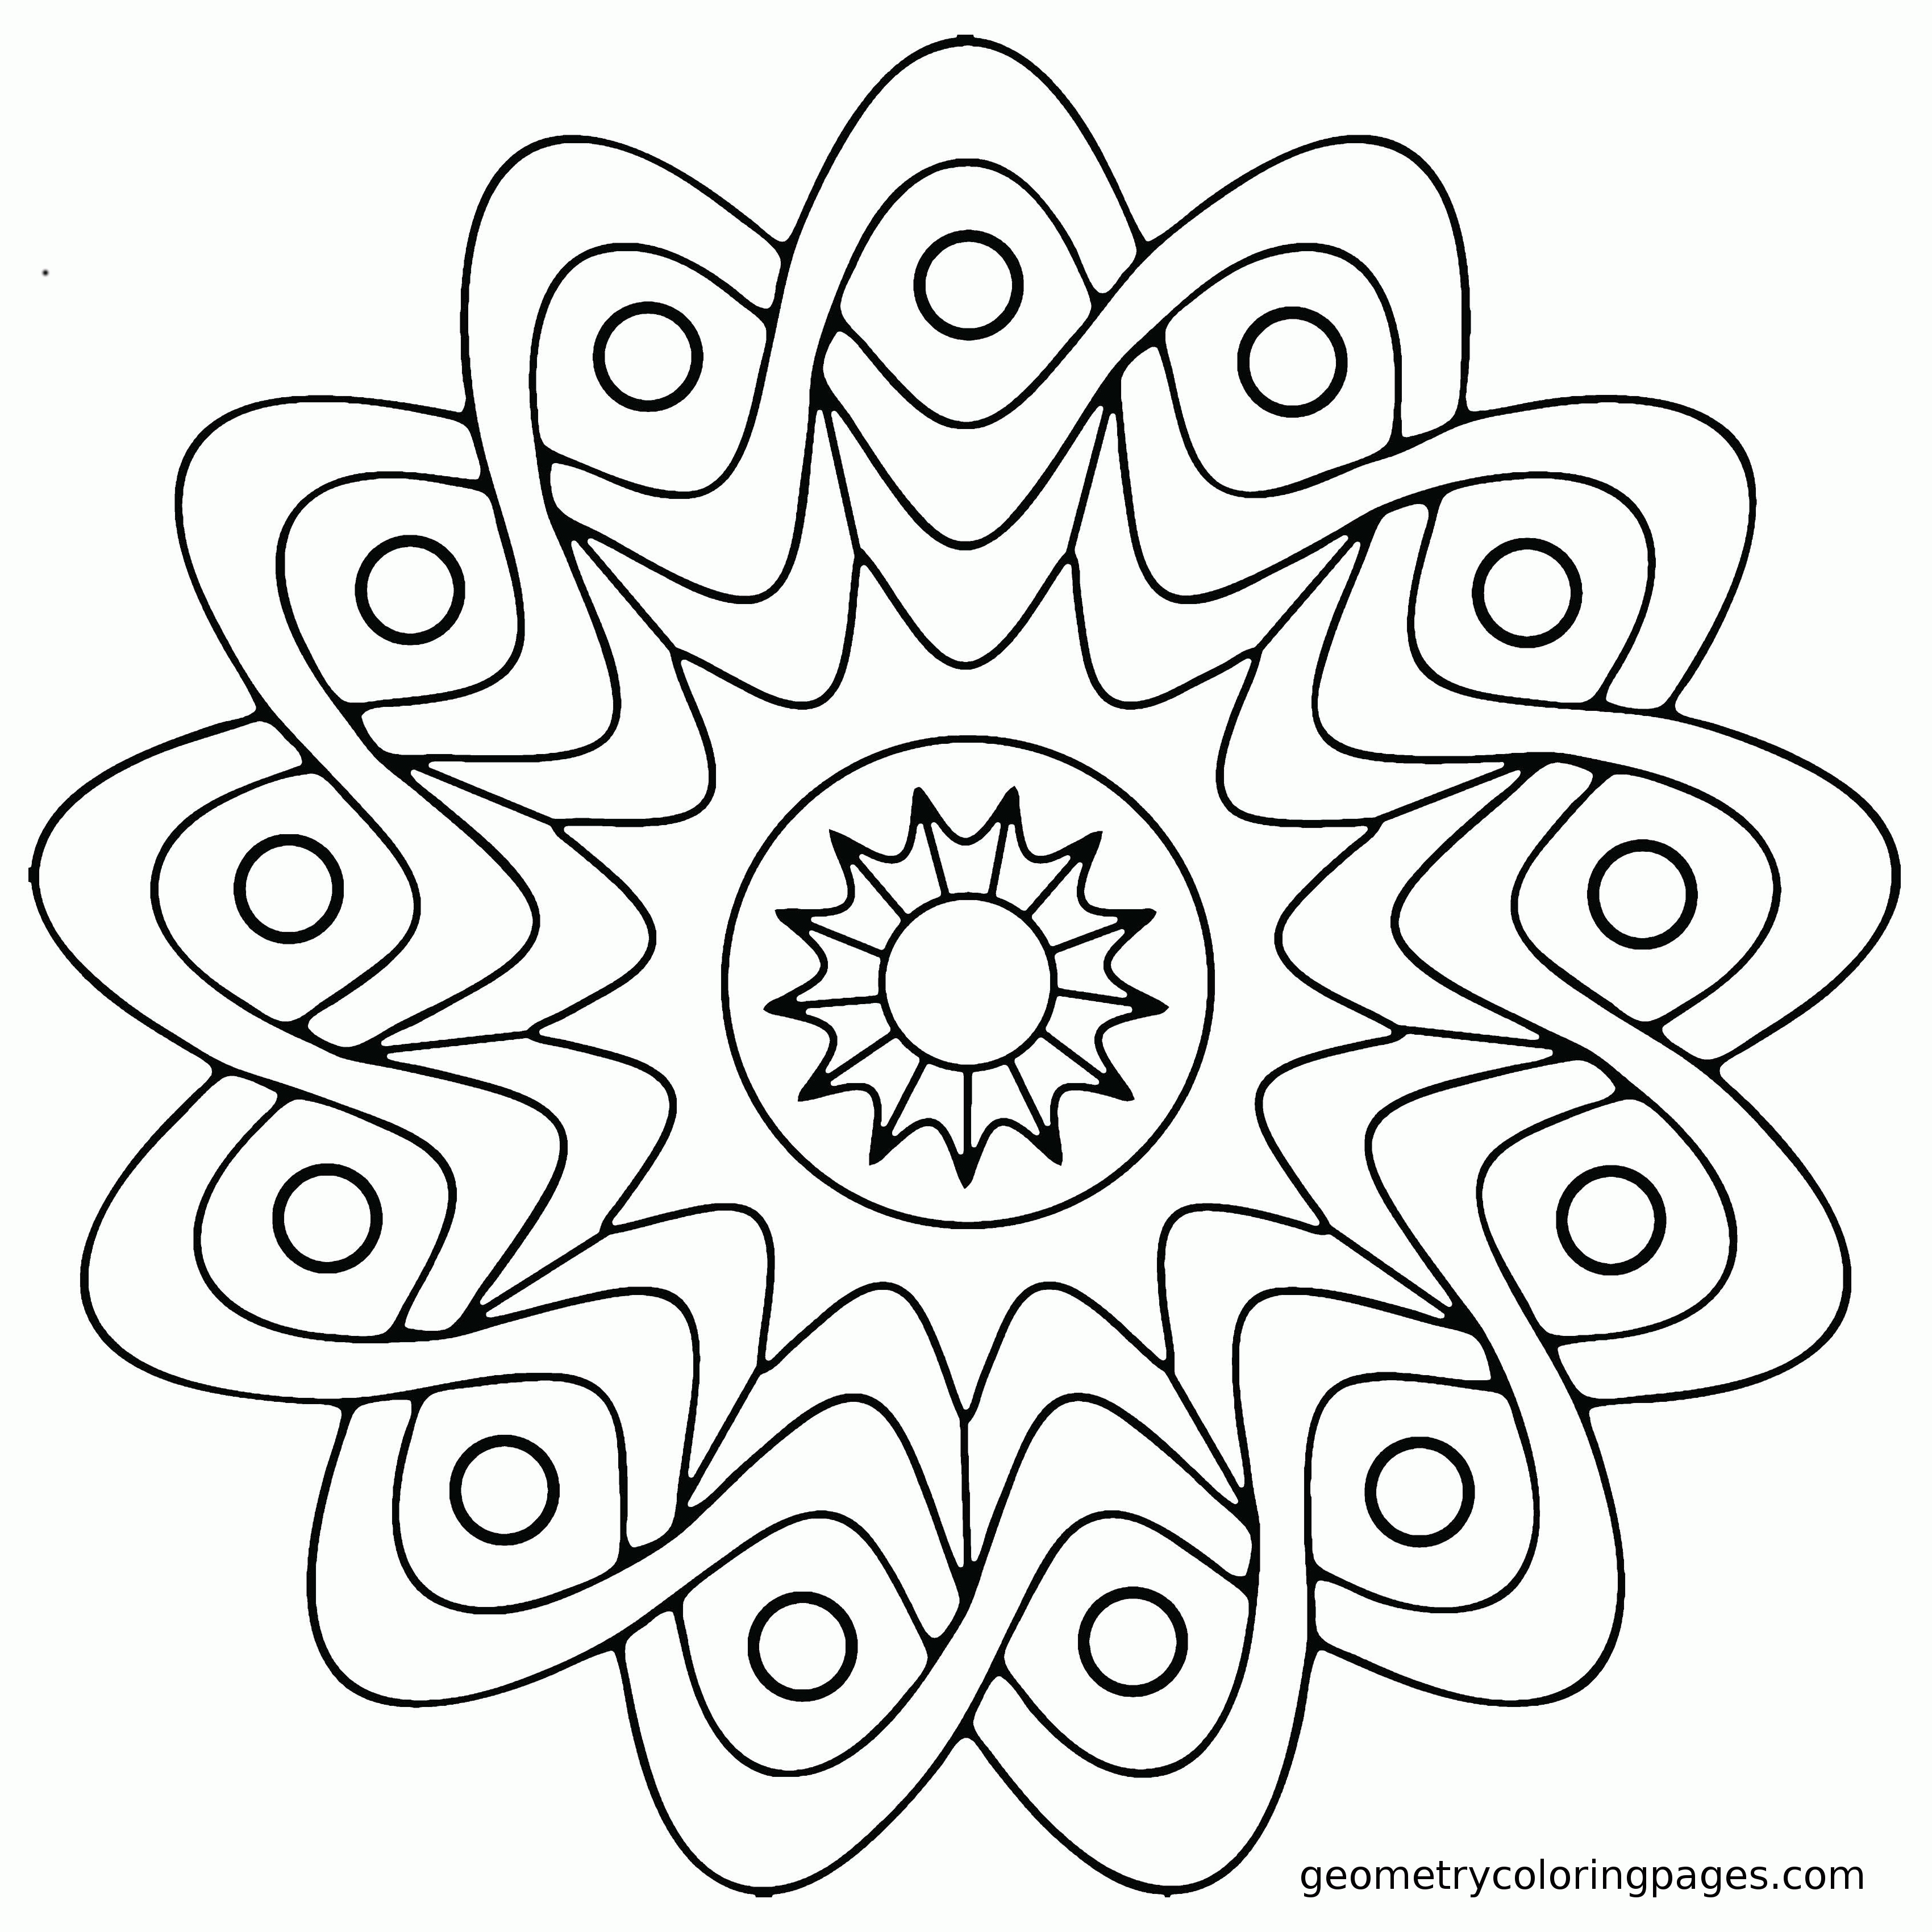 Easy Coloring Pages For Boys Frog. Simple Mandala Coloring Pages ...